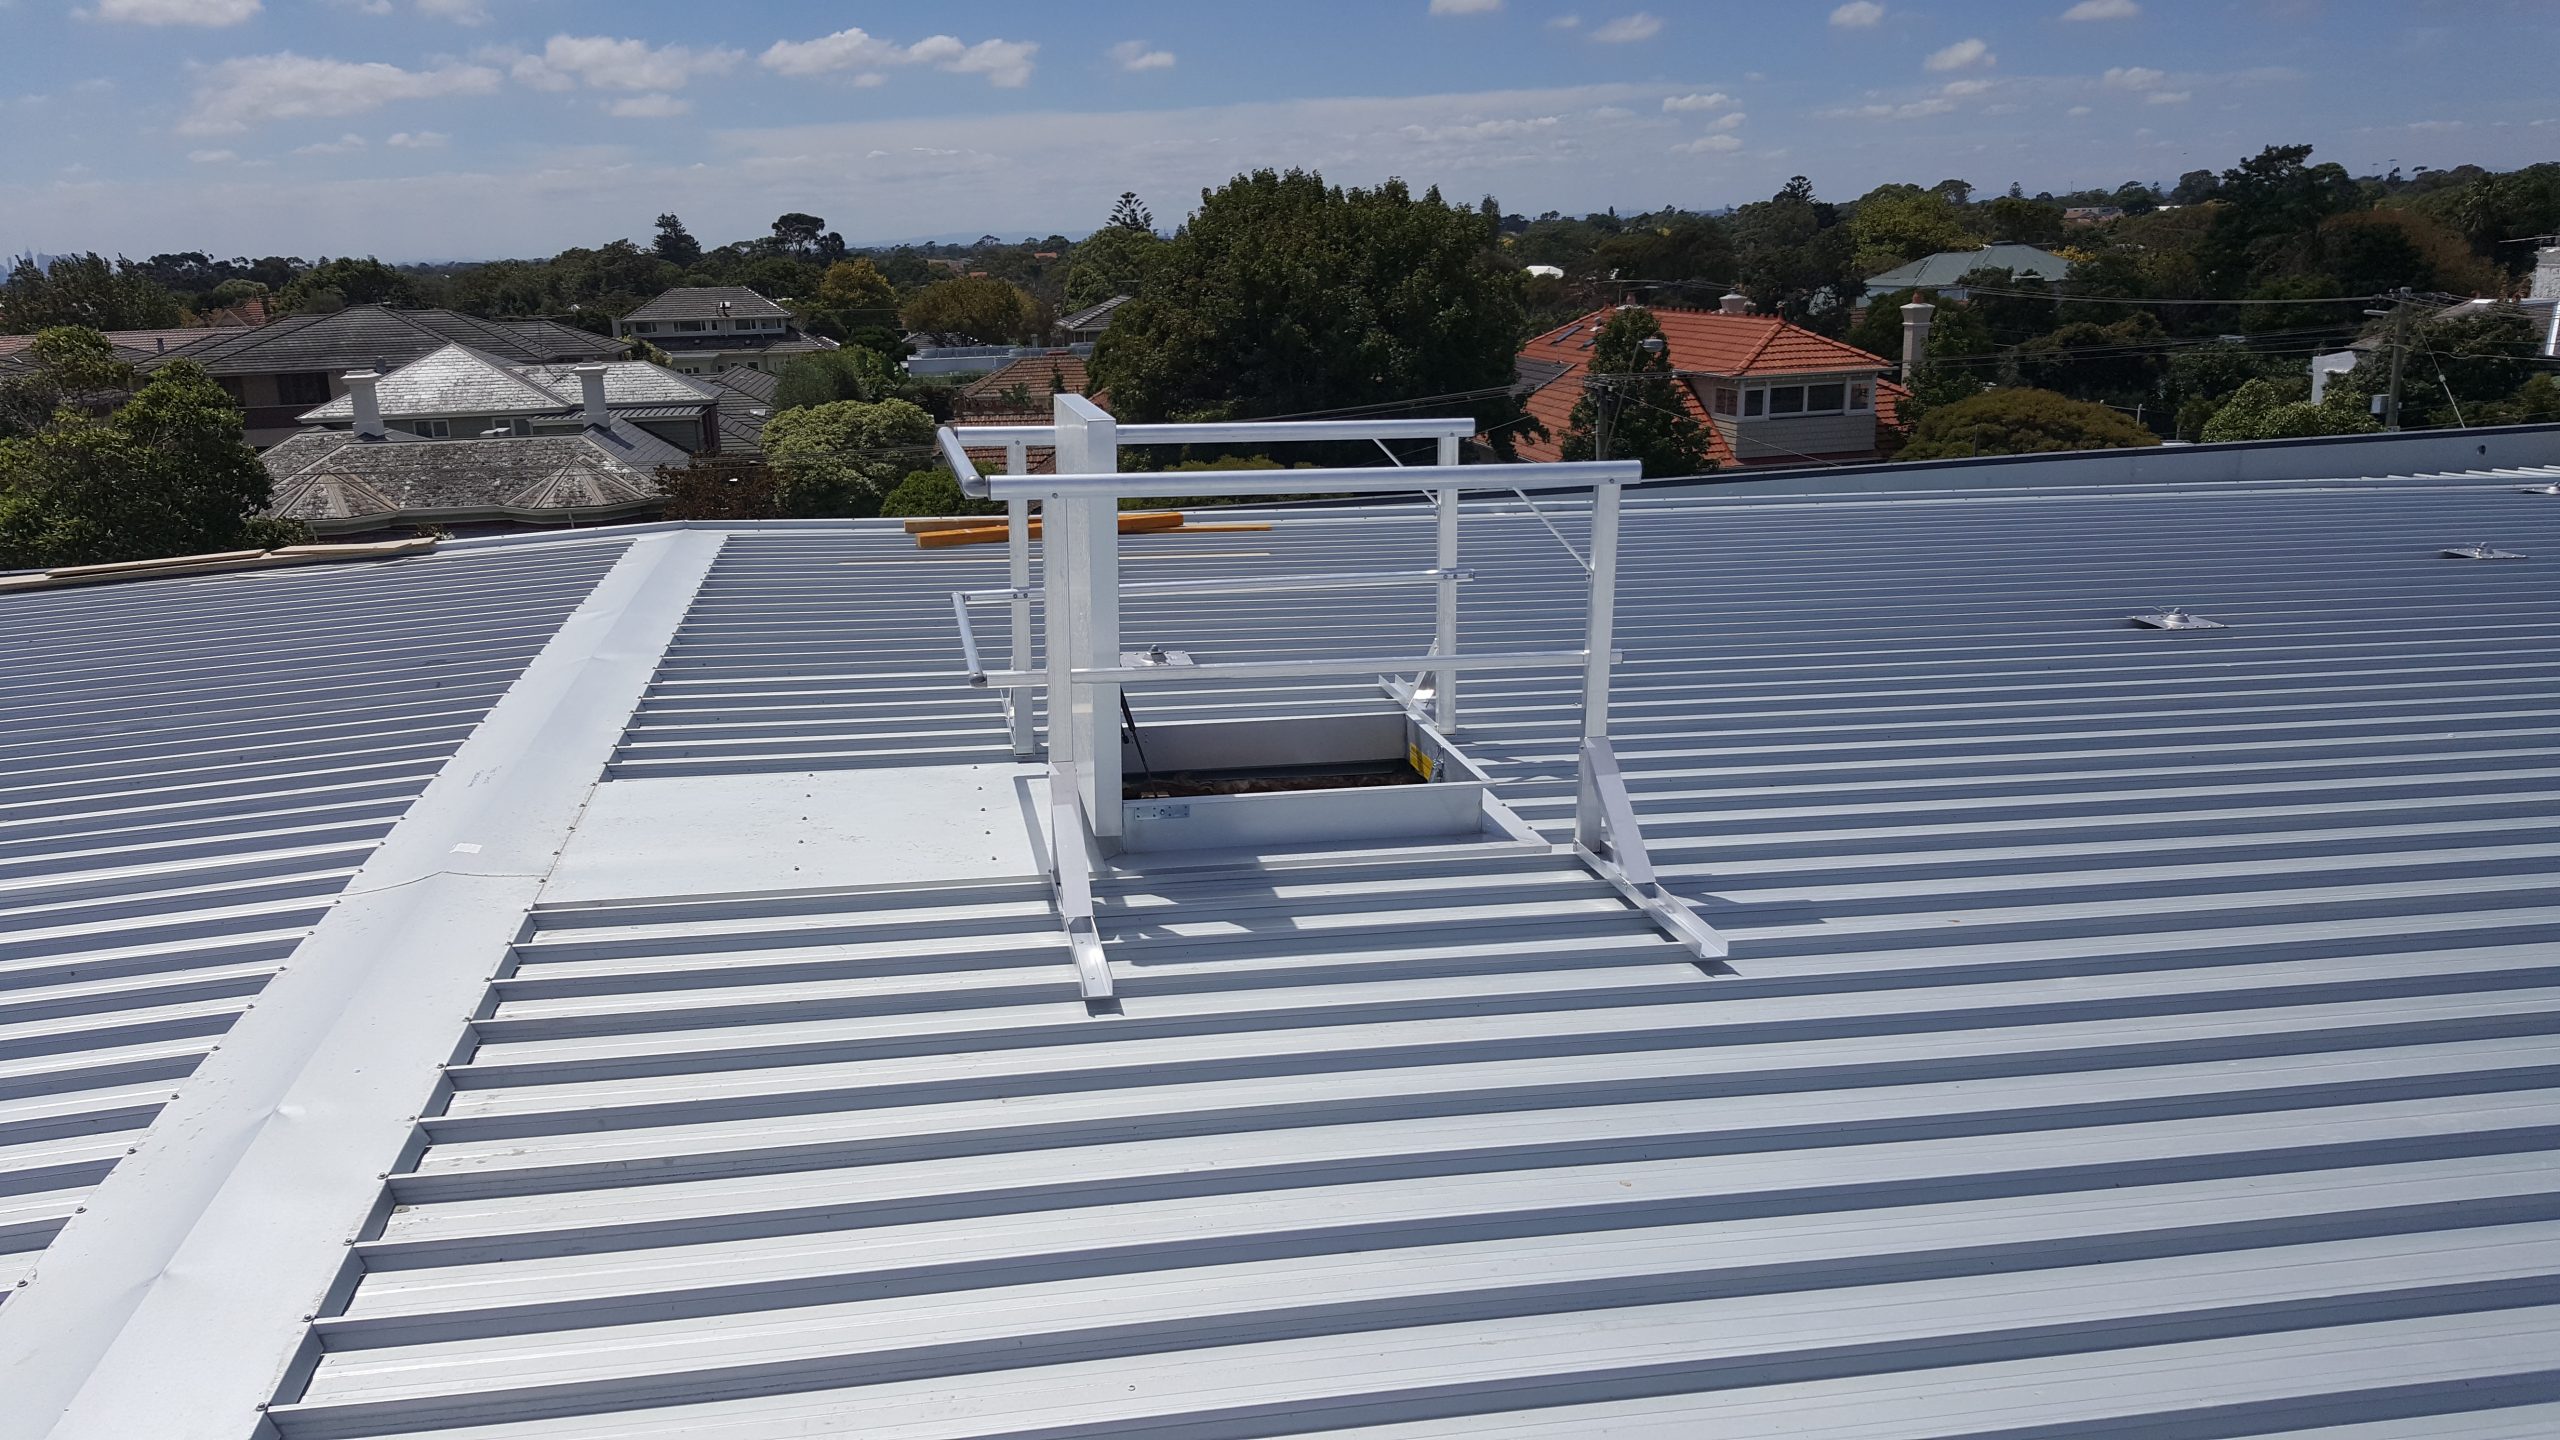 Roof Safety Melbourne - Roof Access Melbourne